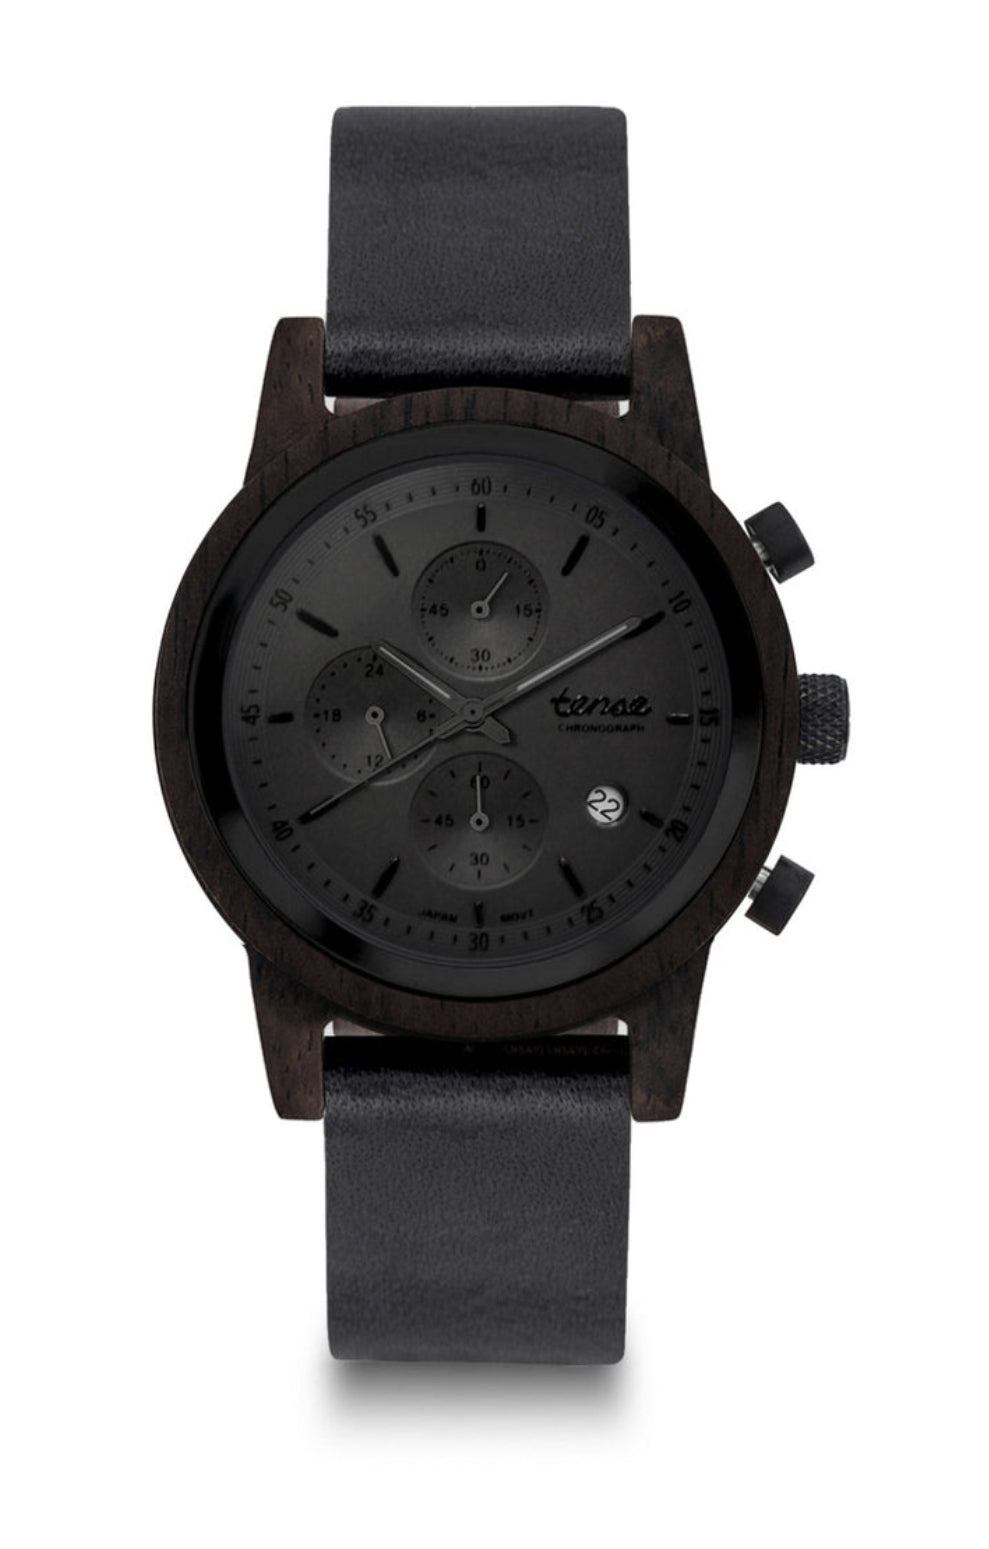 Tense Cambridge Leather Leadwood/Blackout Watch locally Made in Canada 🇨🇦